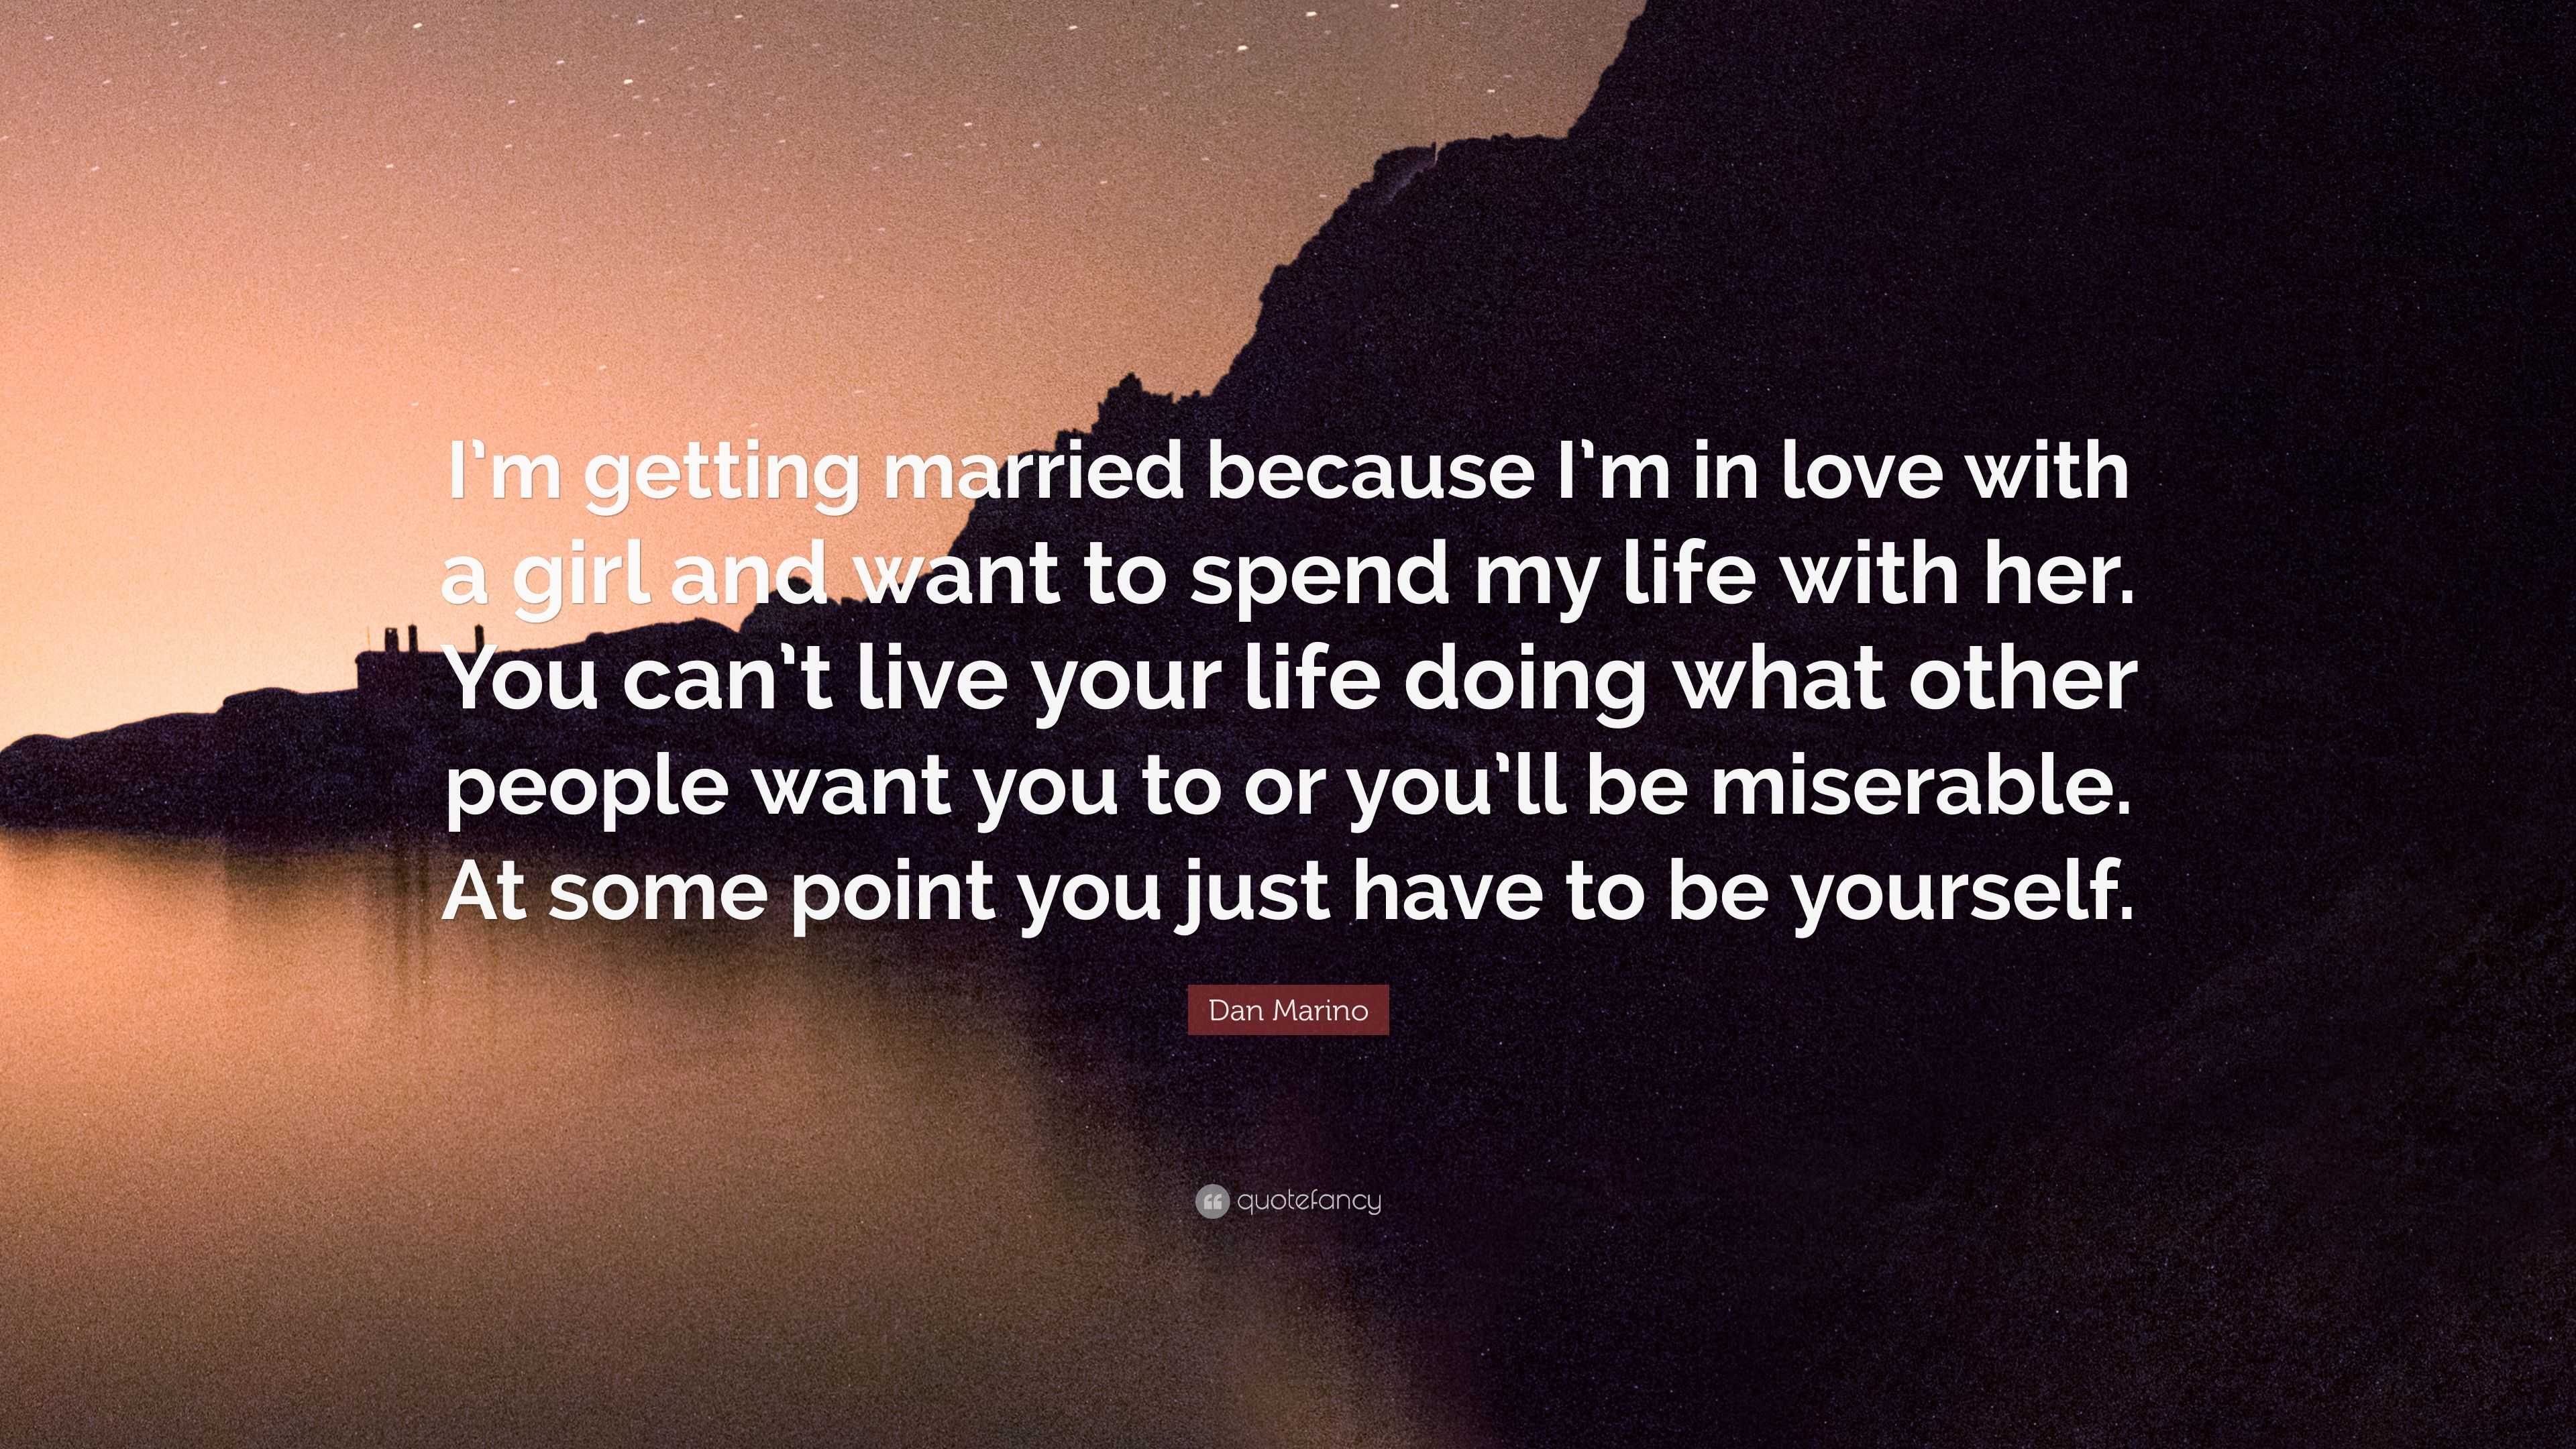 Dan Marino Quote I M Getting Married Because I M In Love With A Girl And Want To Spend My Life With Her You Can T Live Your Life Doing W